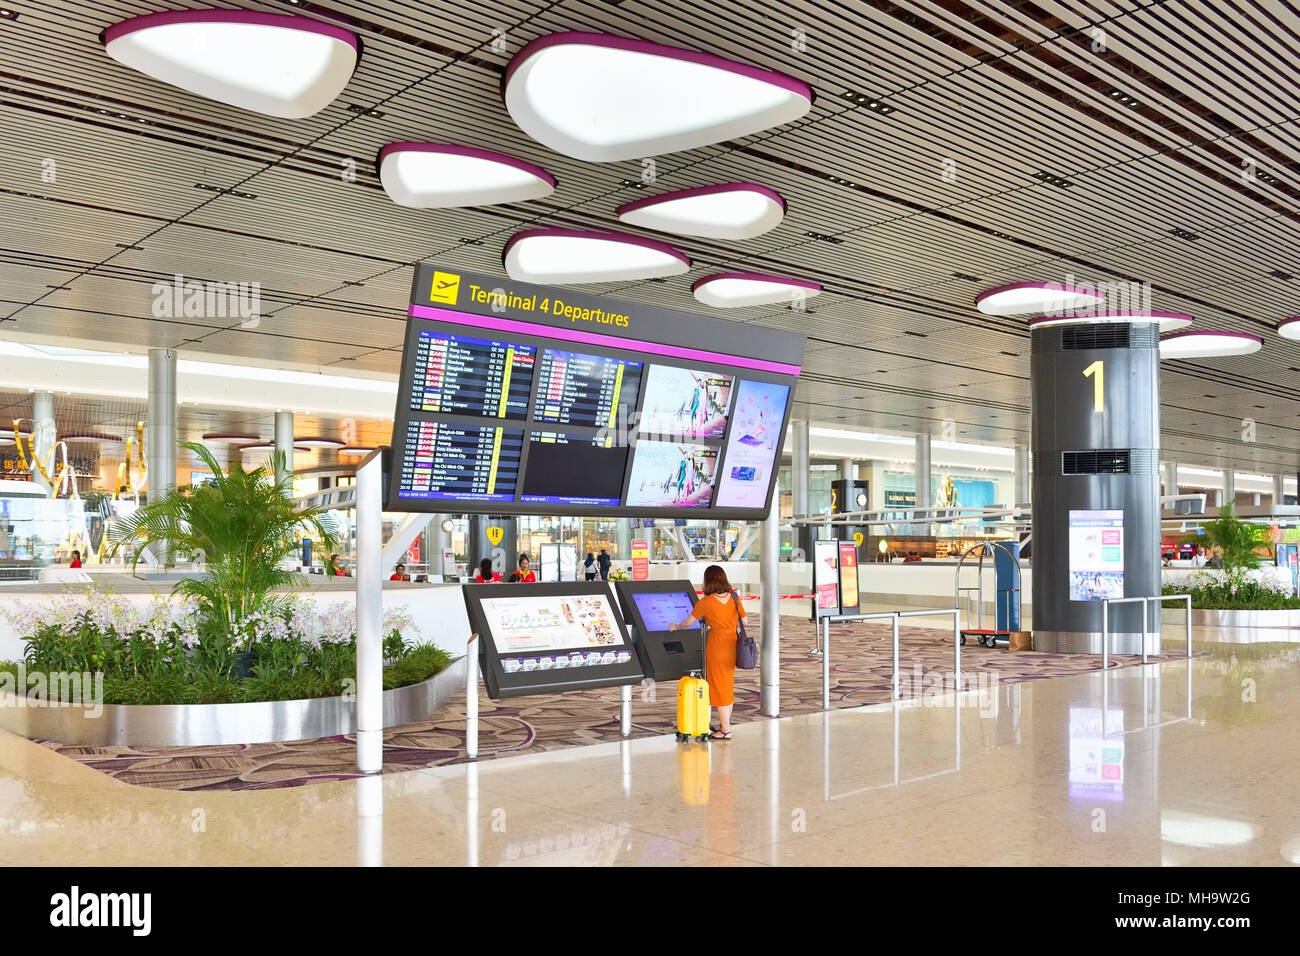 Singapore Changi International Airport, Terminal 4. A solo traveller checks out the flight departure information on a display. Stock Photo